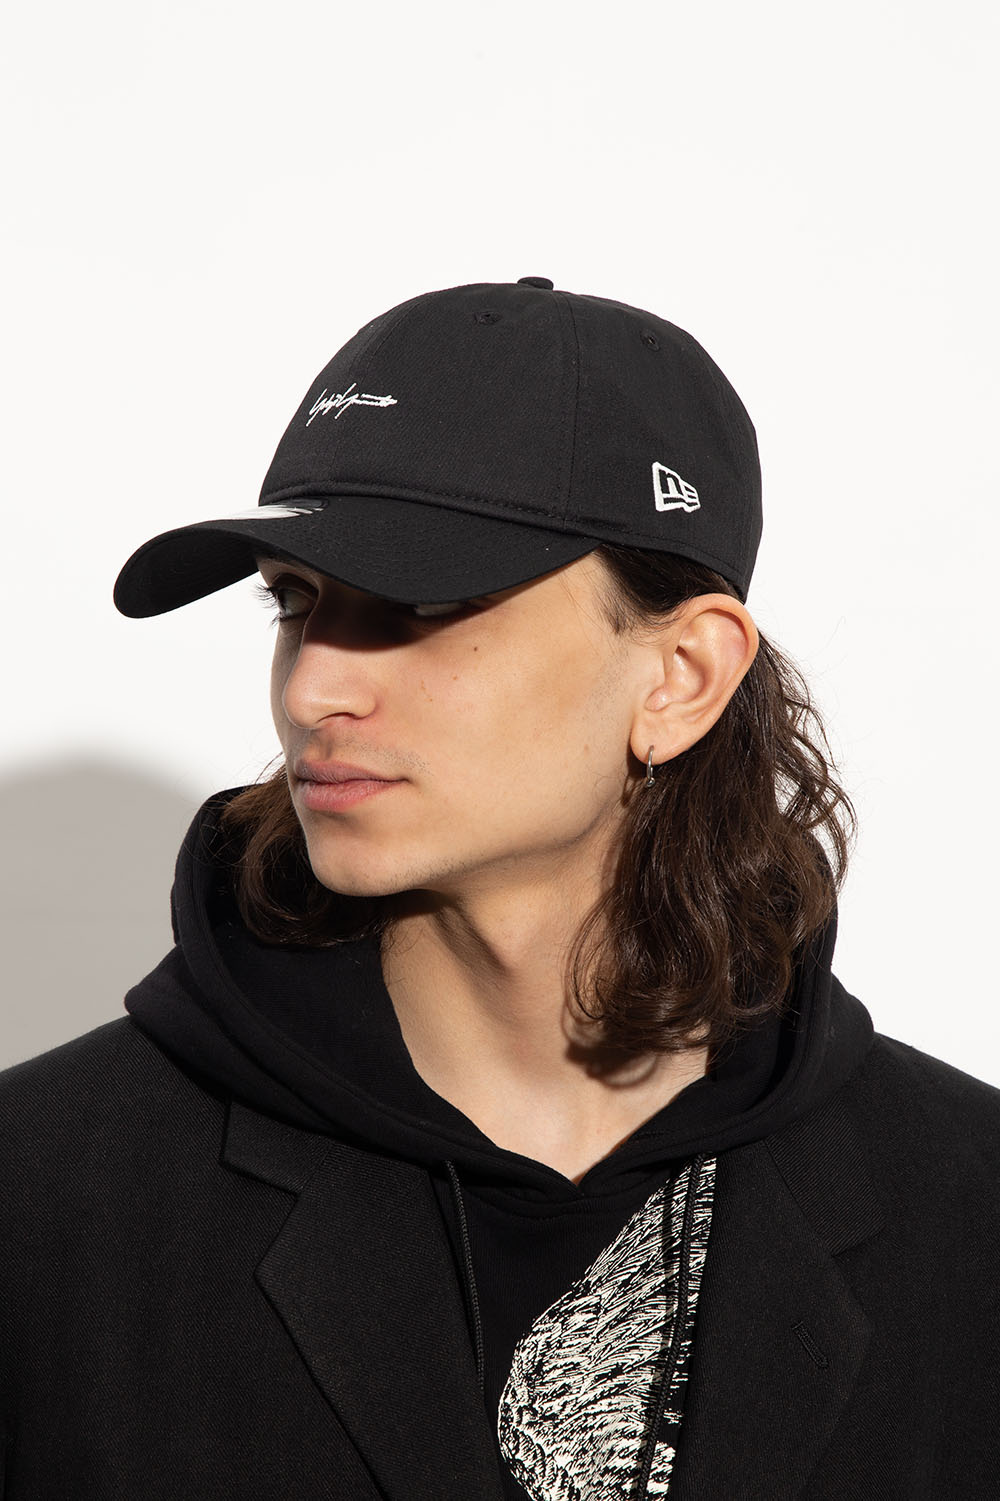 Yohji Yamamoto with its adjacent support caps spelling out the ALL CONDITIONS GEAR mantra